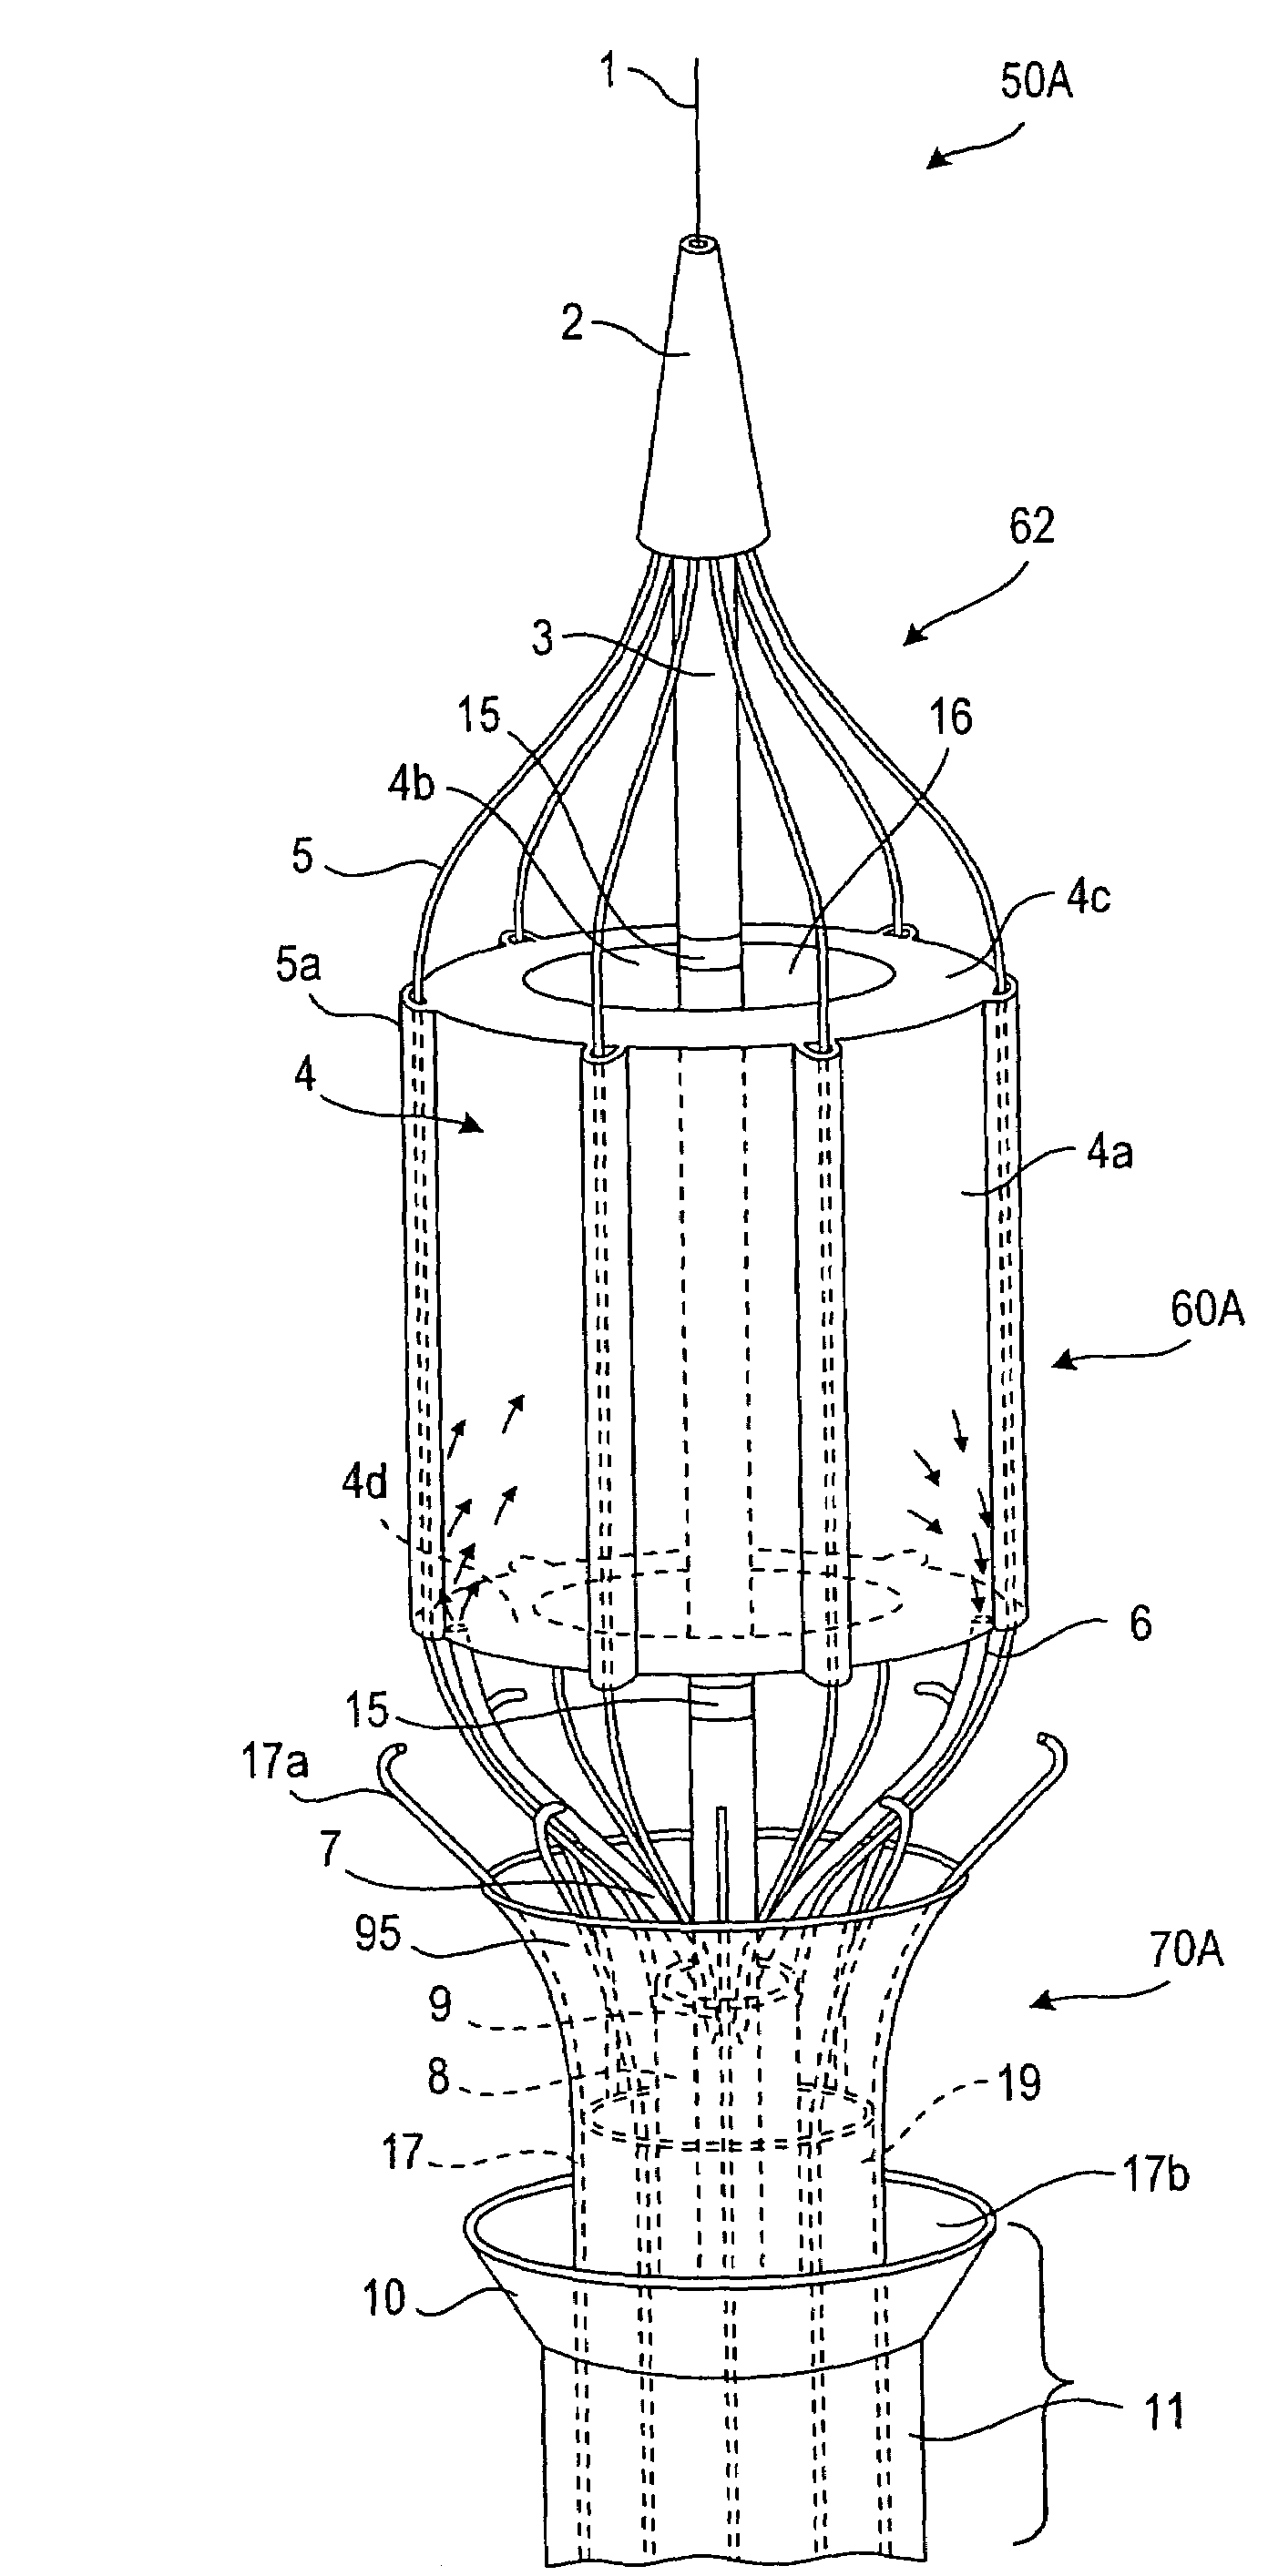 Apparatus for delivering, repositioning and/or retrieving self-expanding stents